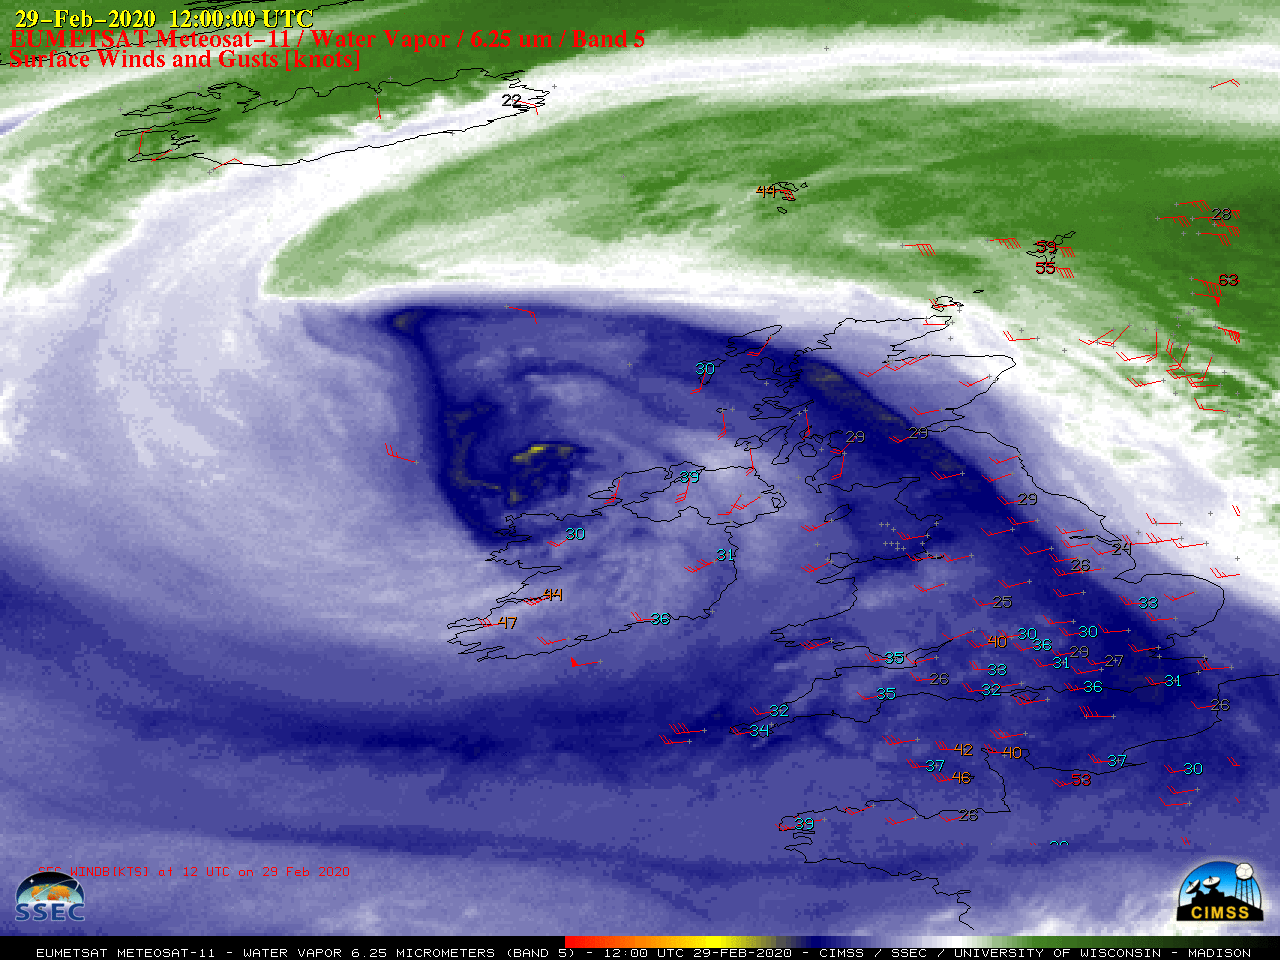 Meteosat-11 Water Vapor (6.25 µm) images, with hourly plots of surface wind barbs and gusts (in knots) [click to play animation | MP4]